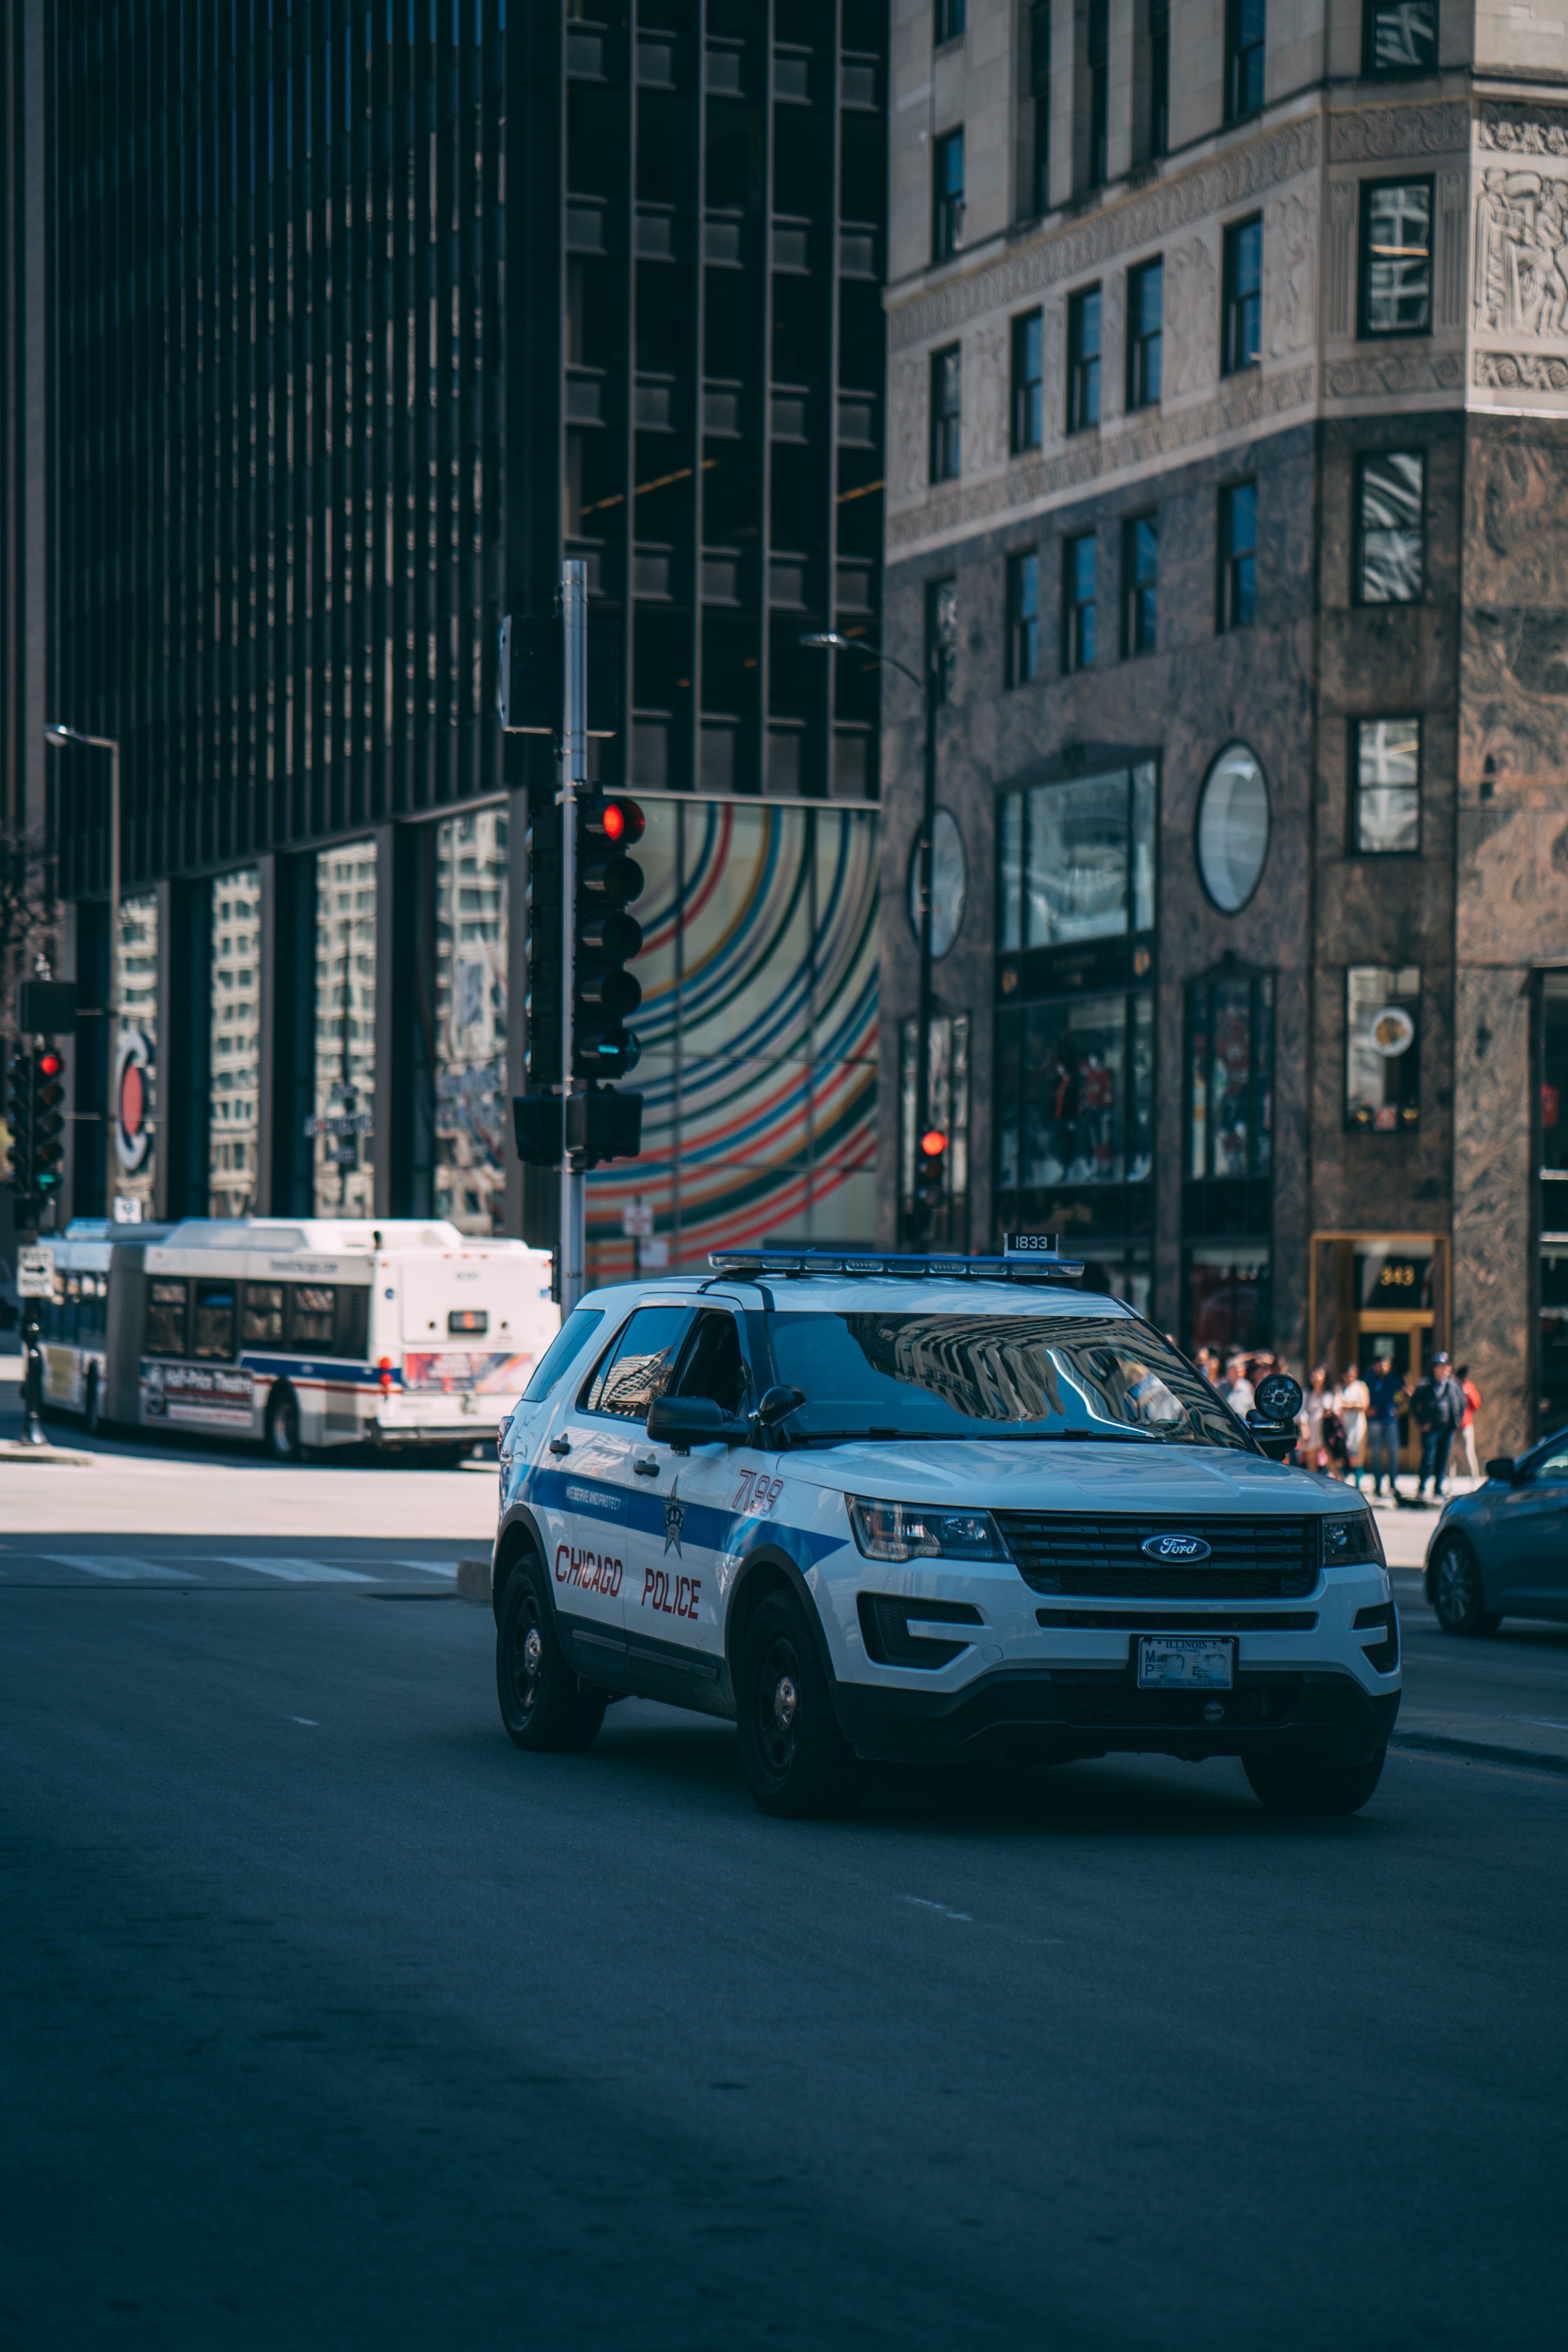 Mrs. Morgan called the cops and notified them about the situation. | Source: Pexels